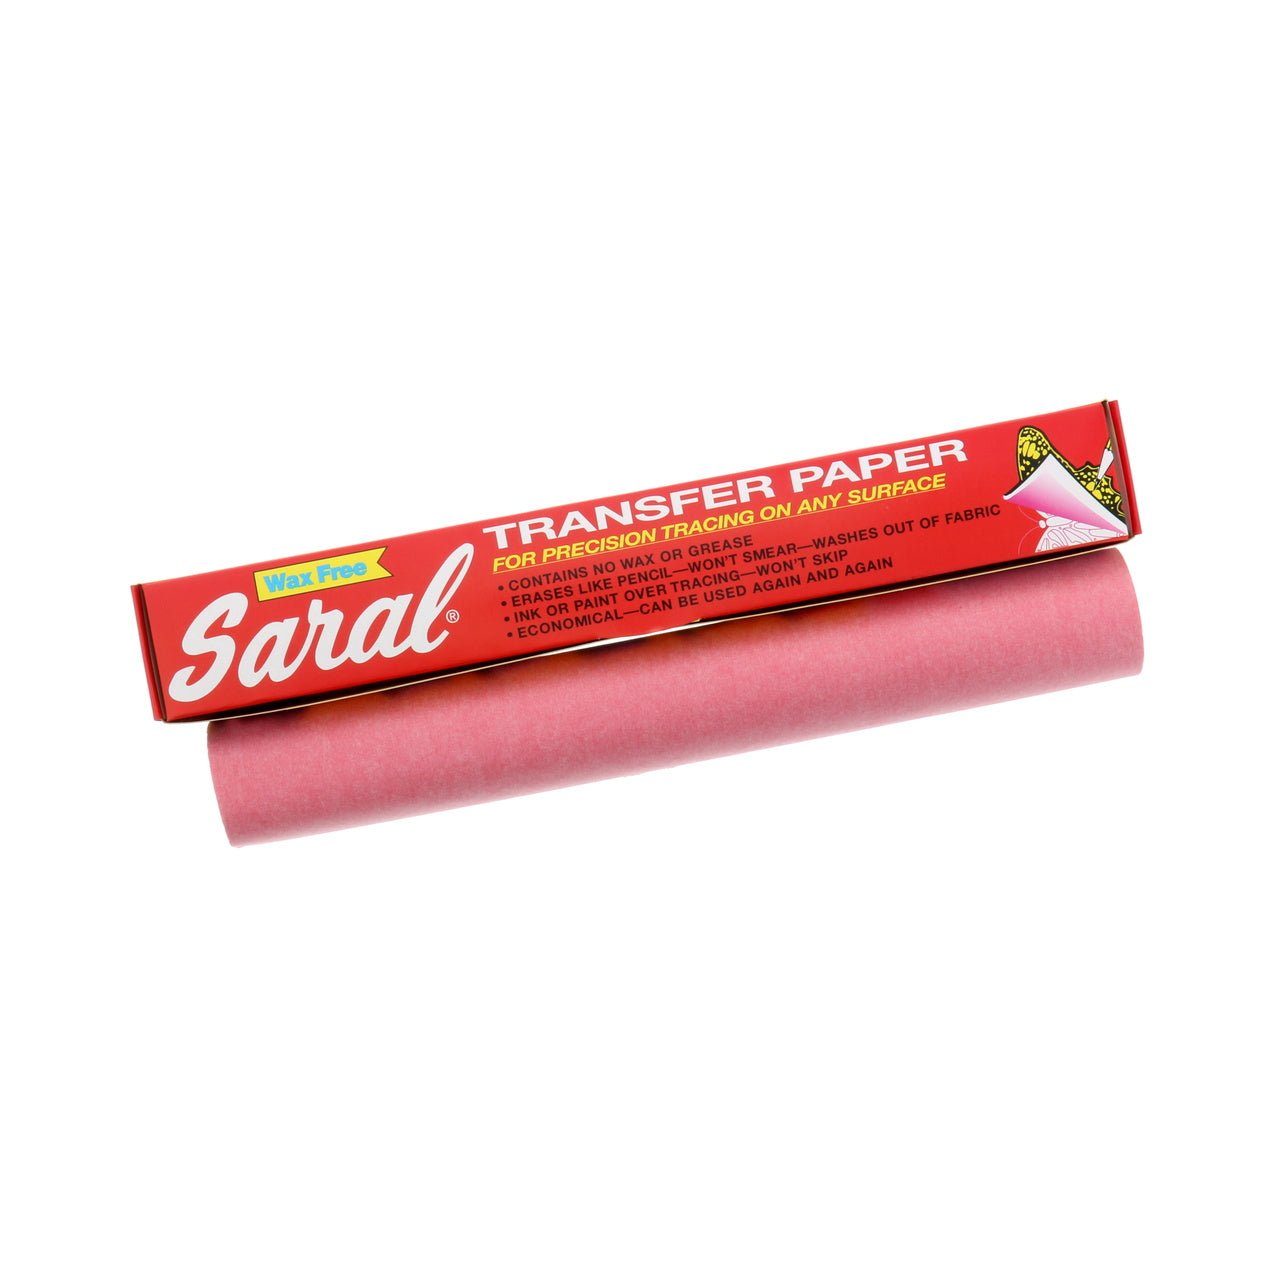 Saral Transfer Paper - 12 inch by 12 ft roll - Red - merriartist.com